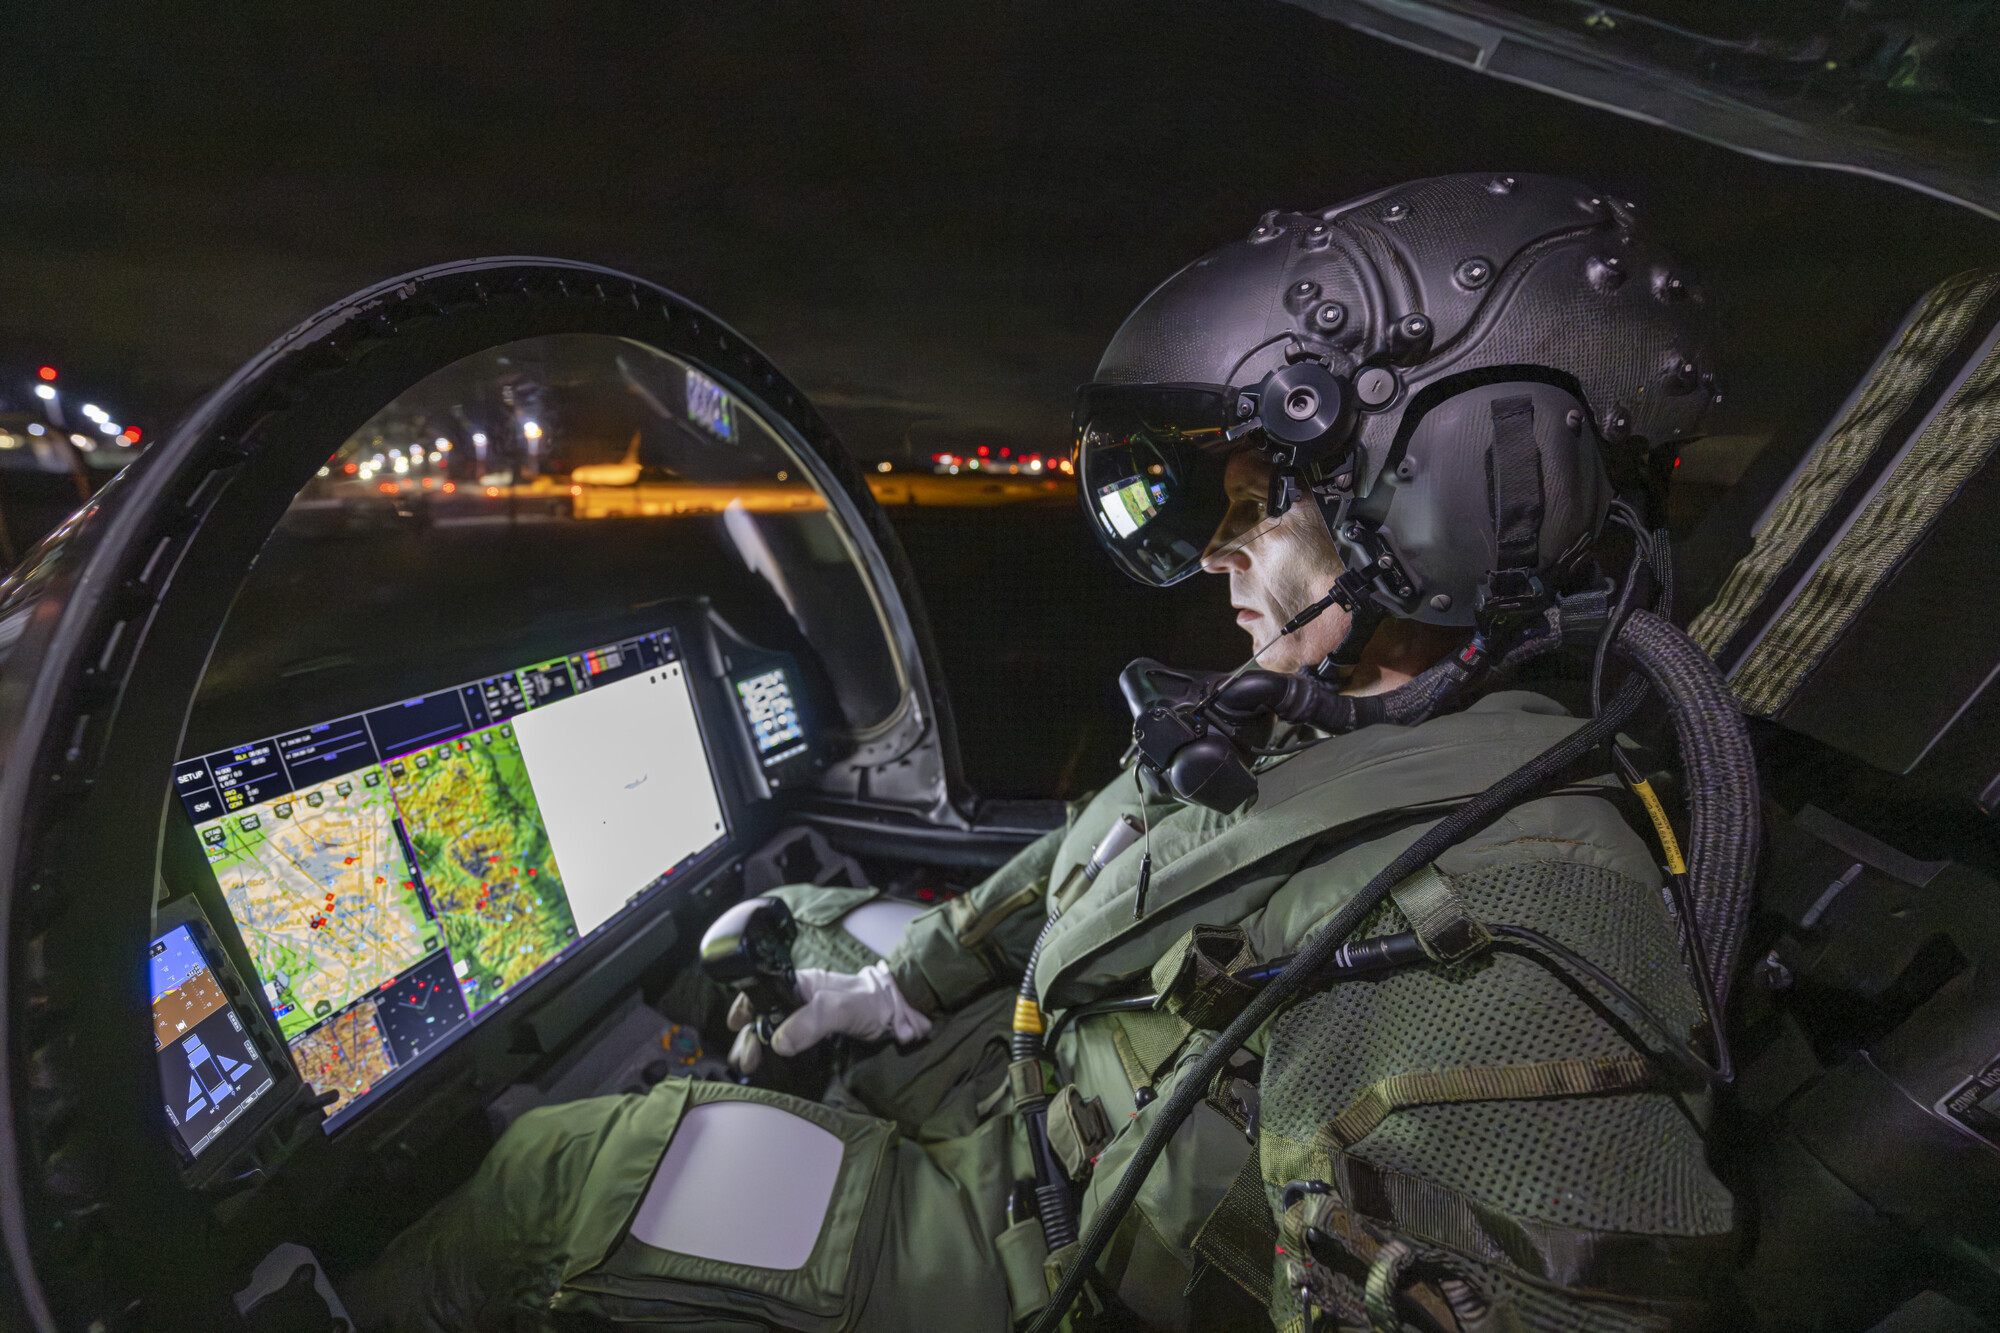 Pilot in aircraft wearing helmet and looking at aircraft screen